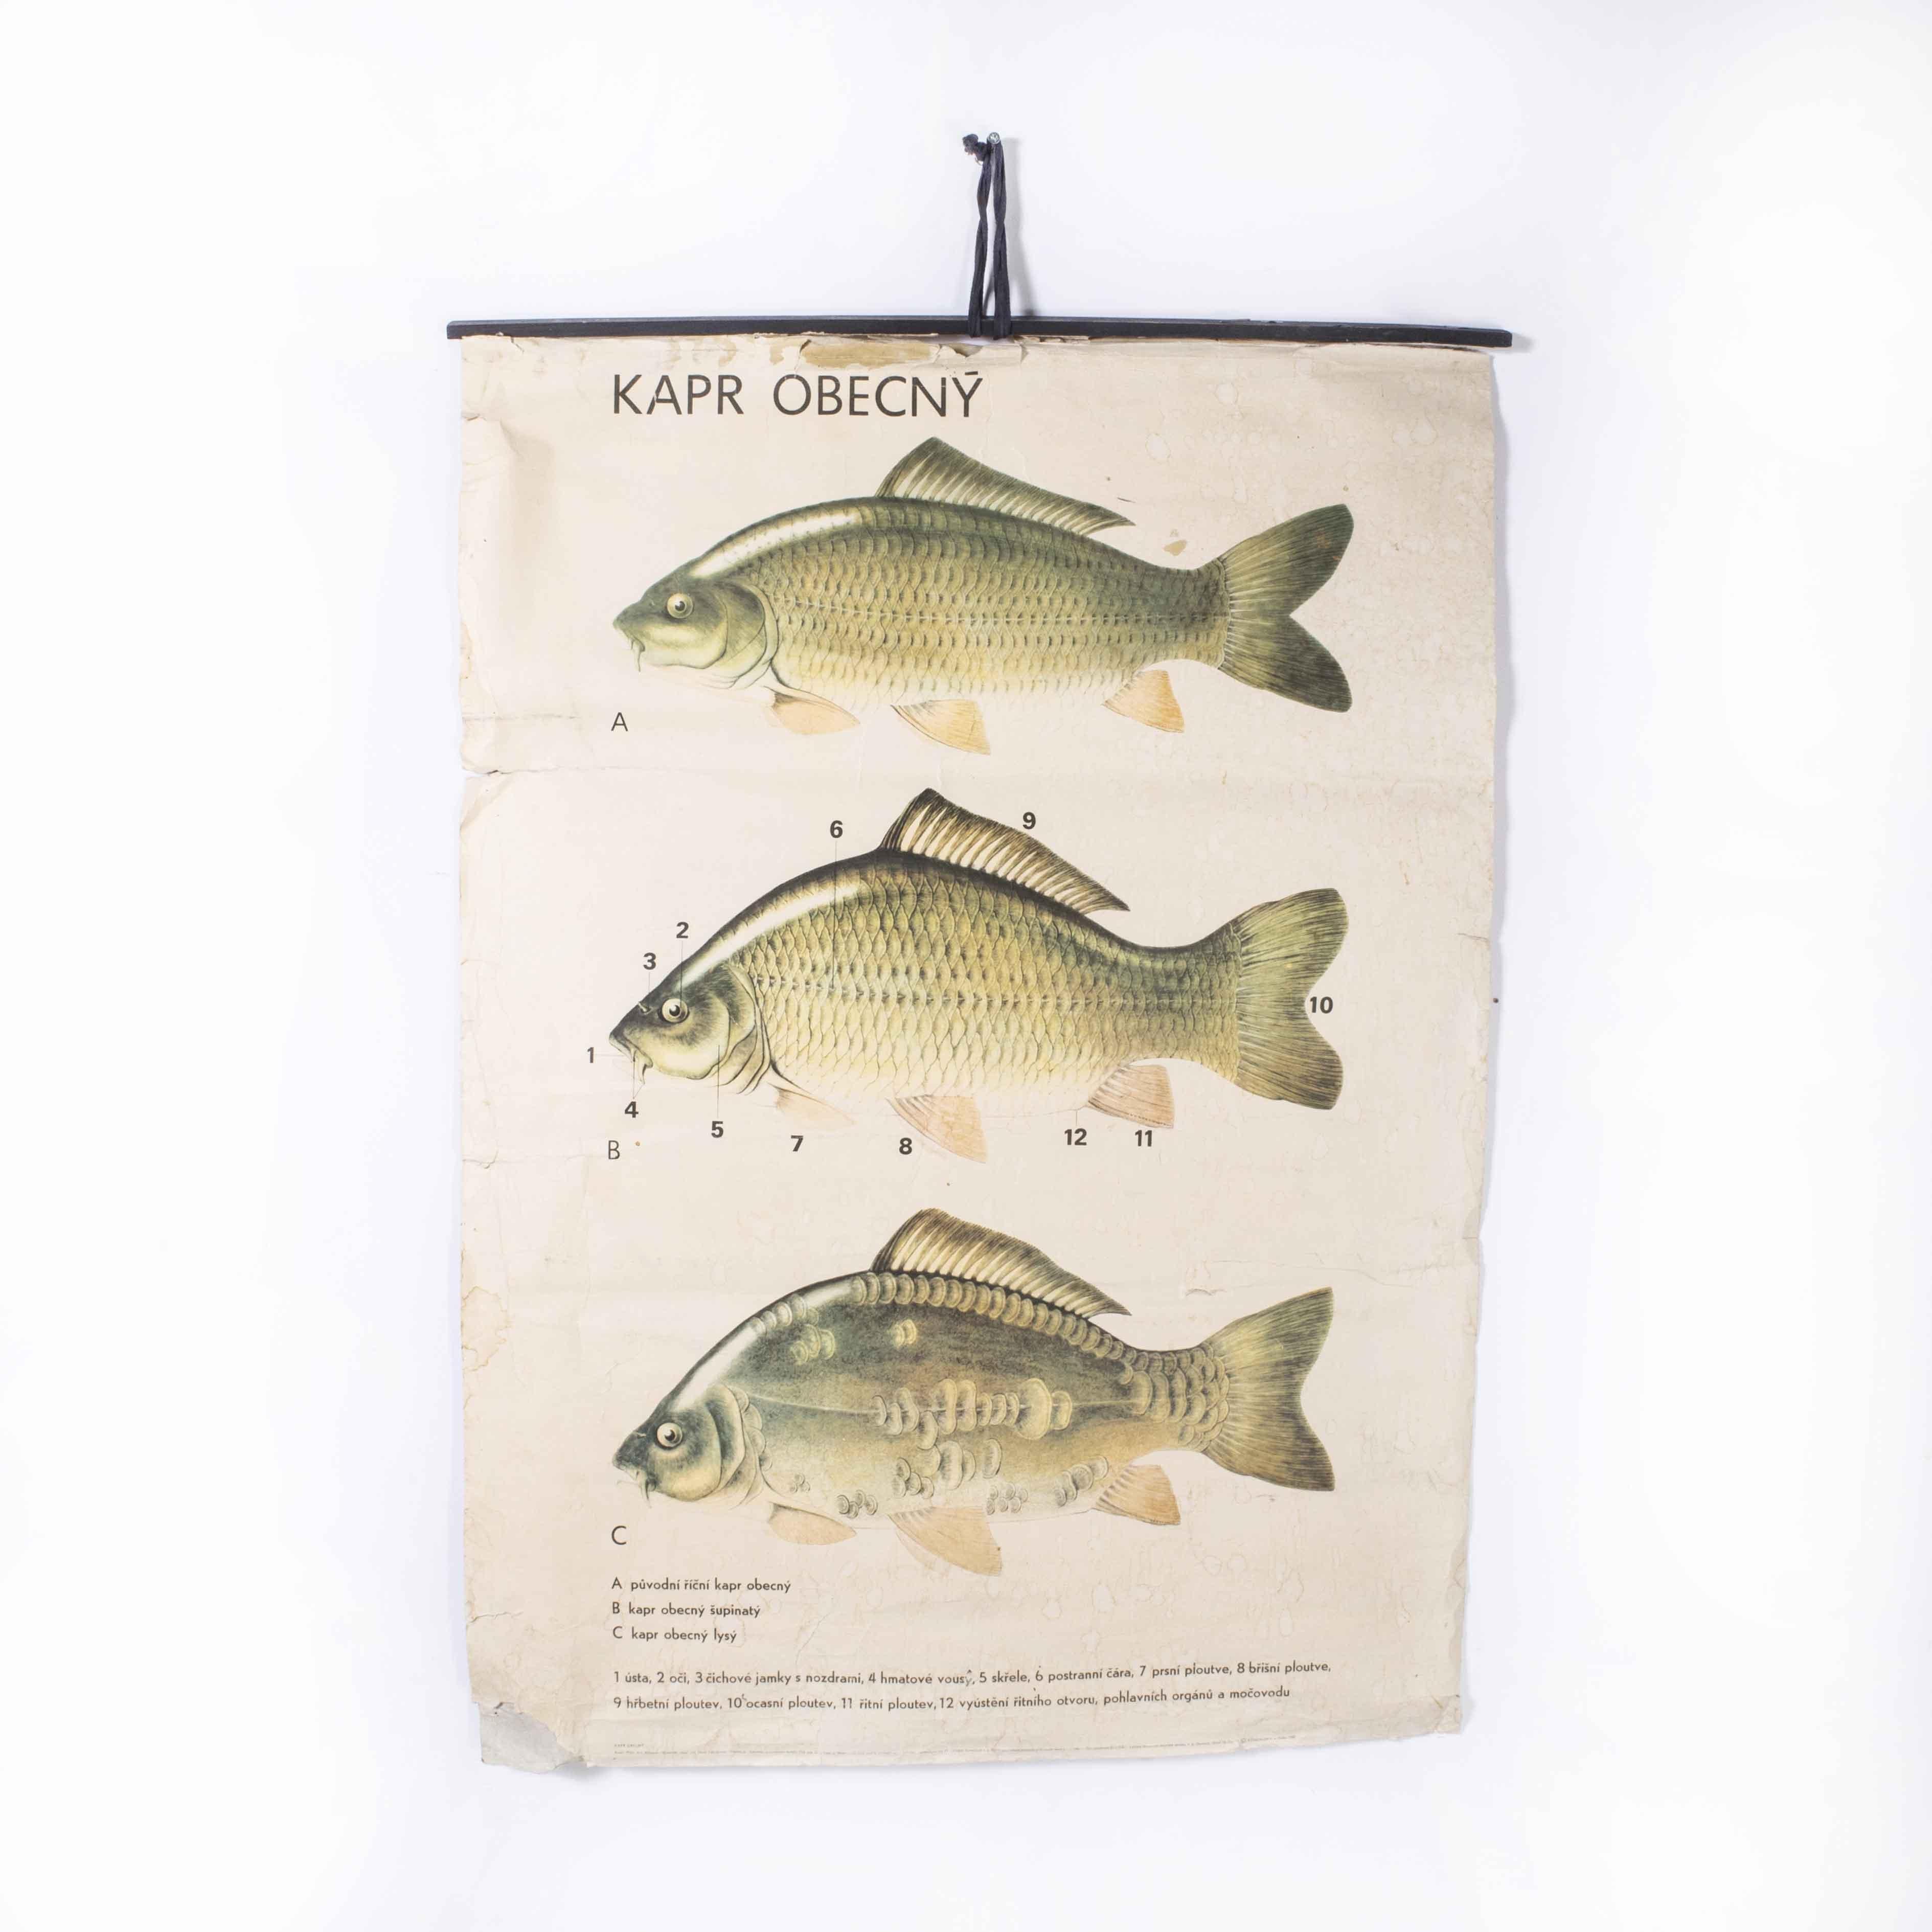 1980’s Fish educational poster
1980’s Fish educational poster. 20th Century Czechoslovakian educational chart. A rare and vintage wall chart from the Czech Republic illustrating the anatomy of a fish. This heavyweight paper chart is In excellent